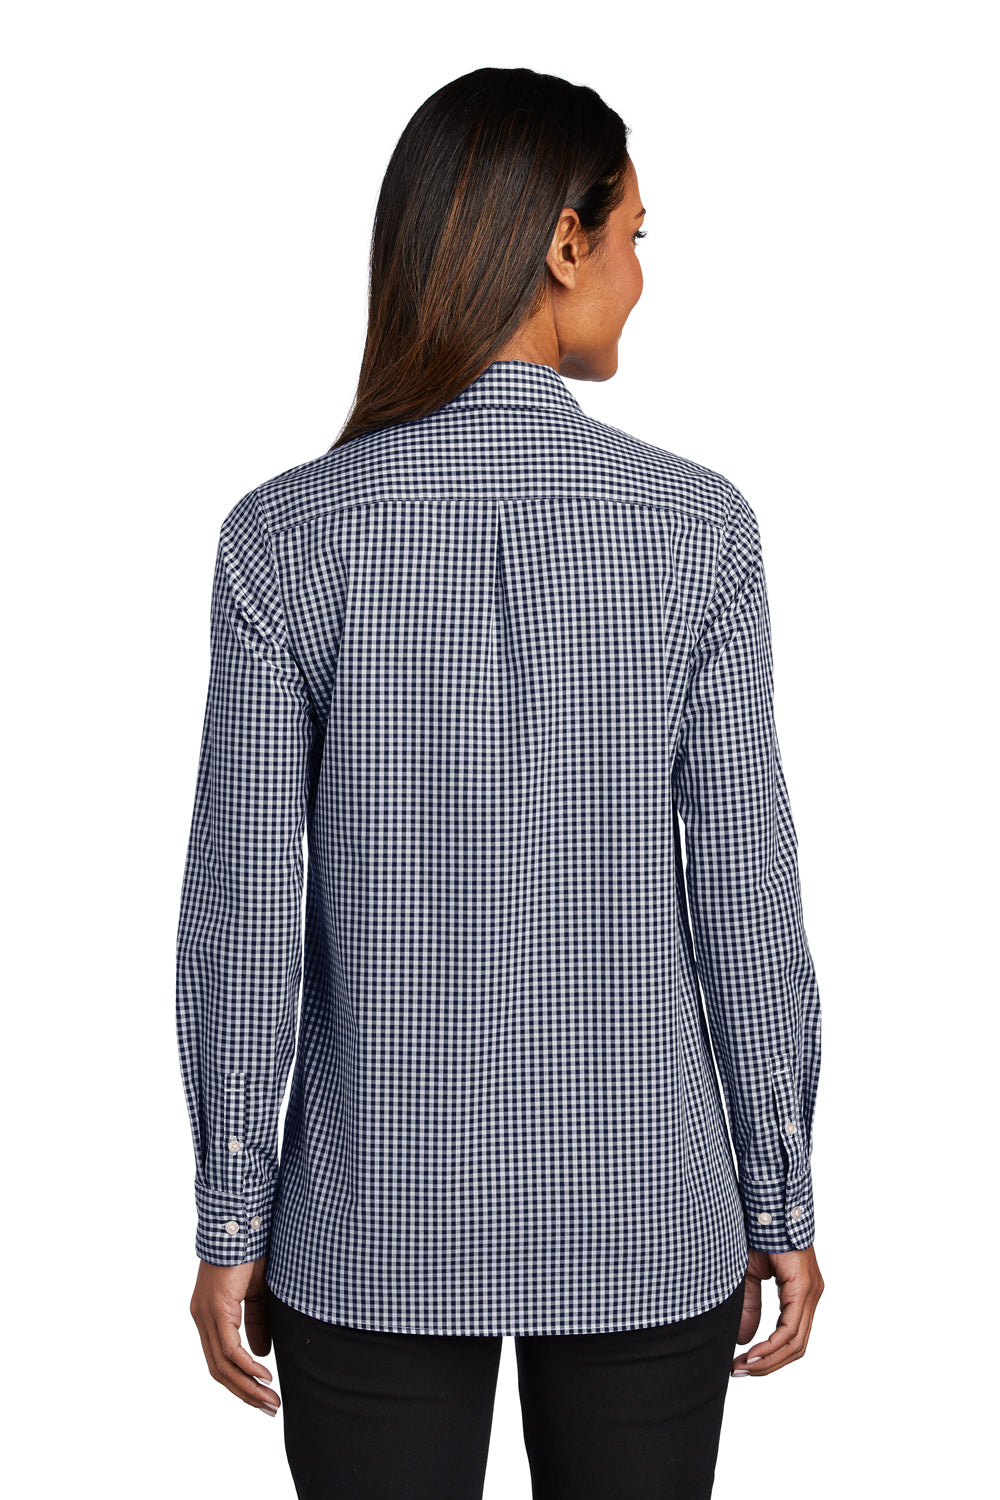 Port Authority Womens Broadcloth Gingham Long Sleeve Button Down Shirt True Navy Blue/White Side